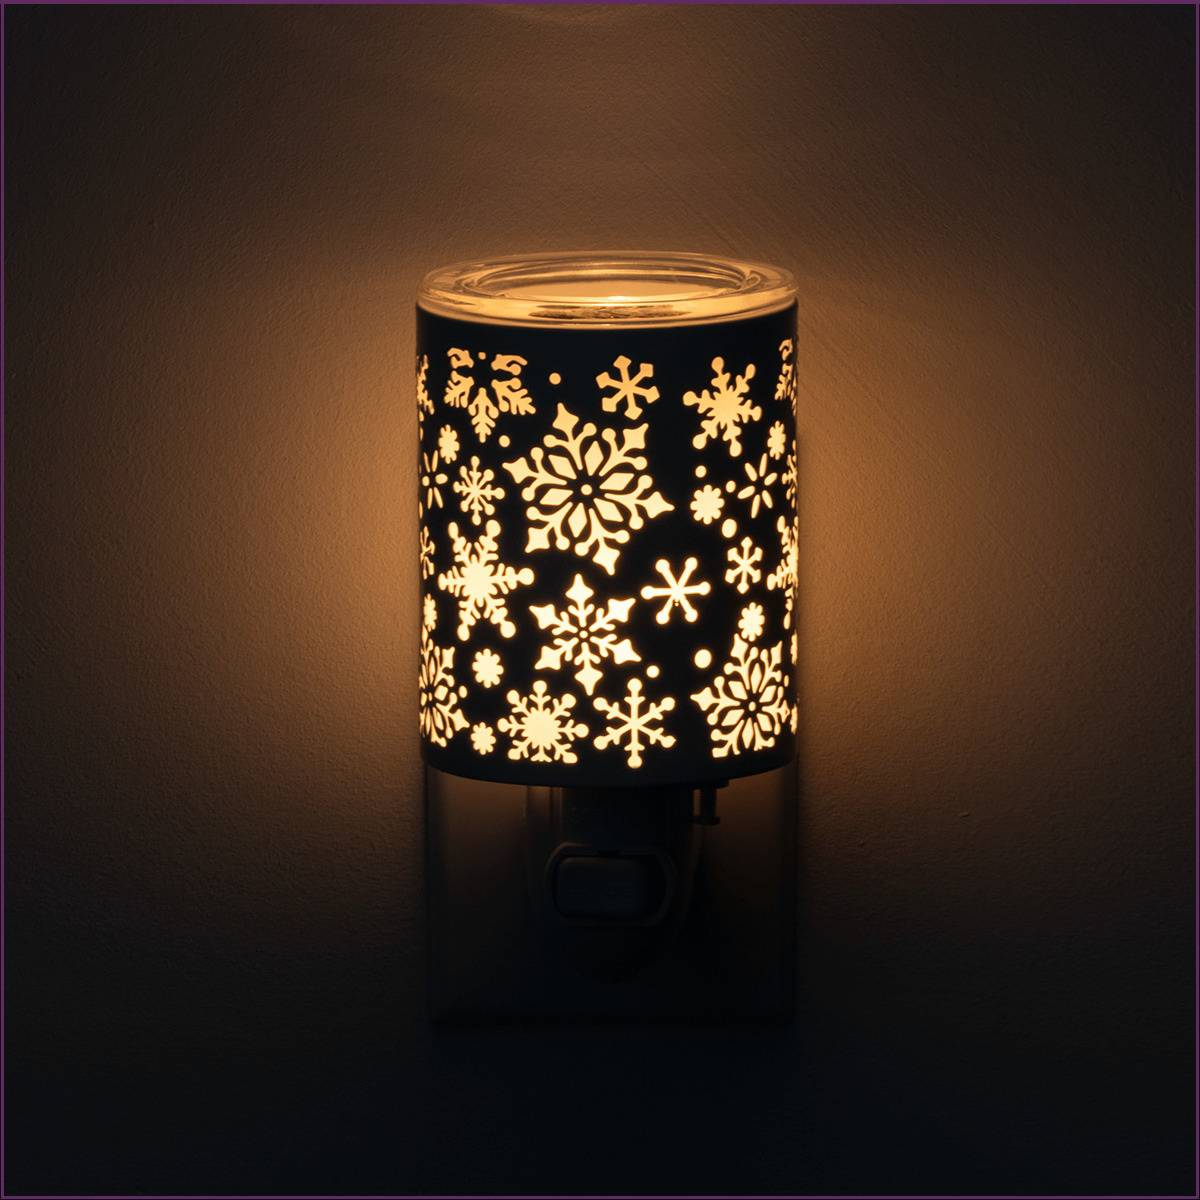 Catching Snowflakes Scentsy Mini Warmer | Dark On